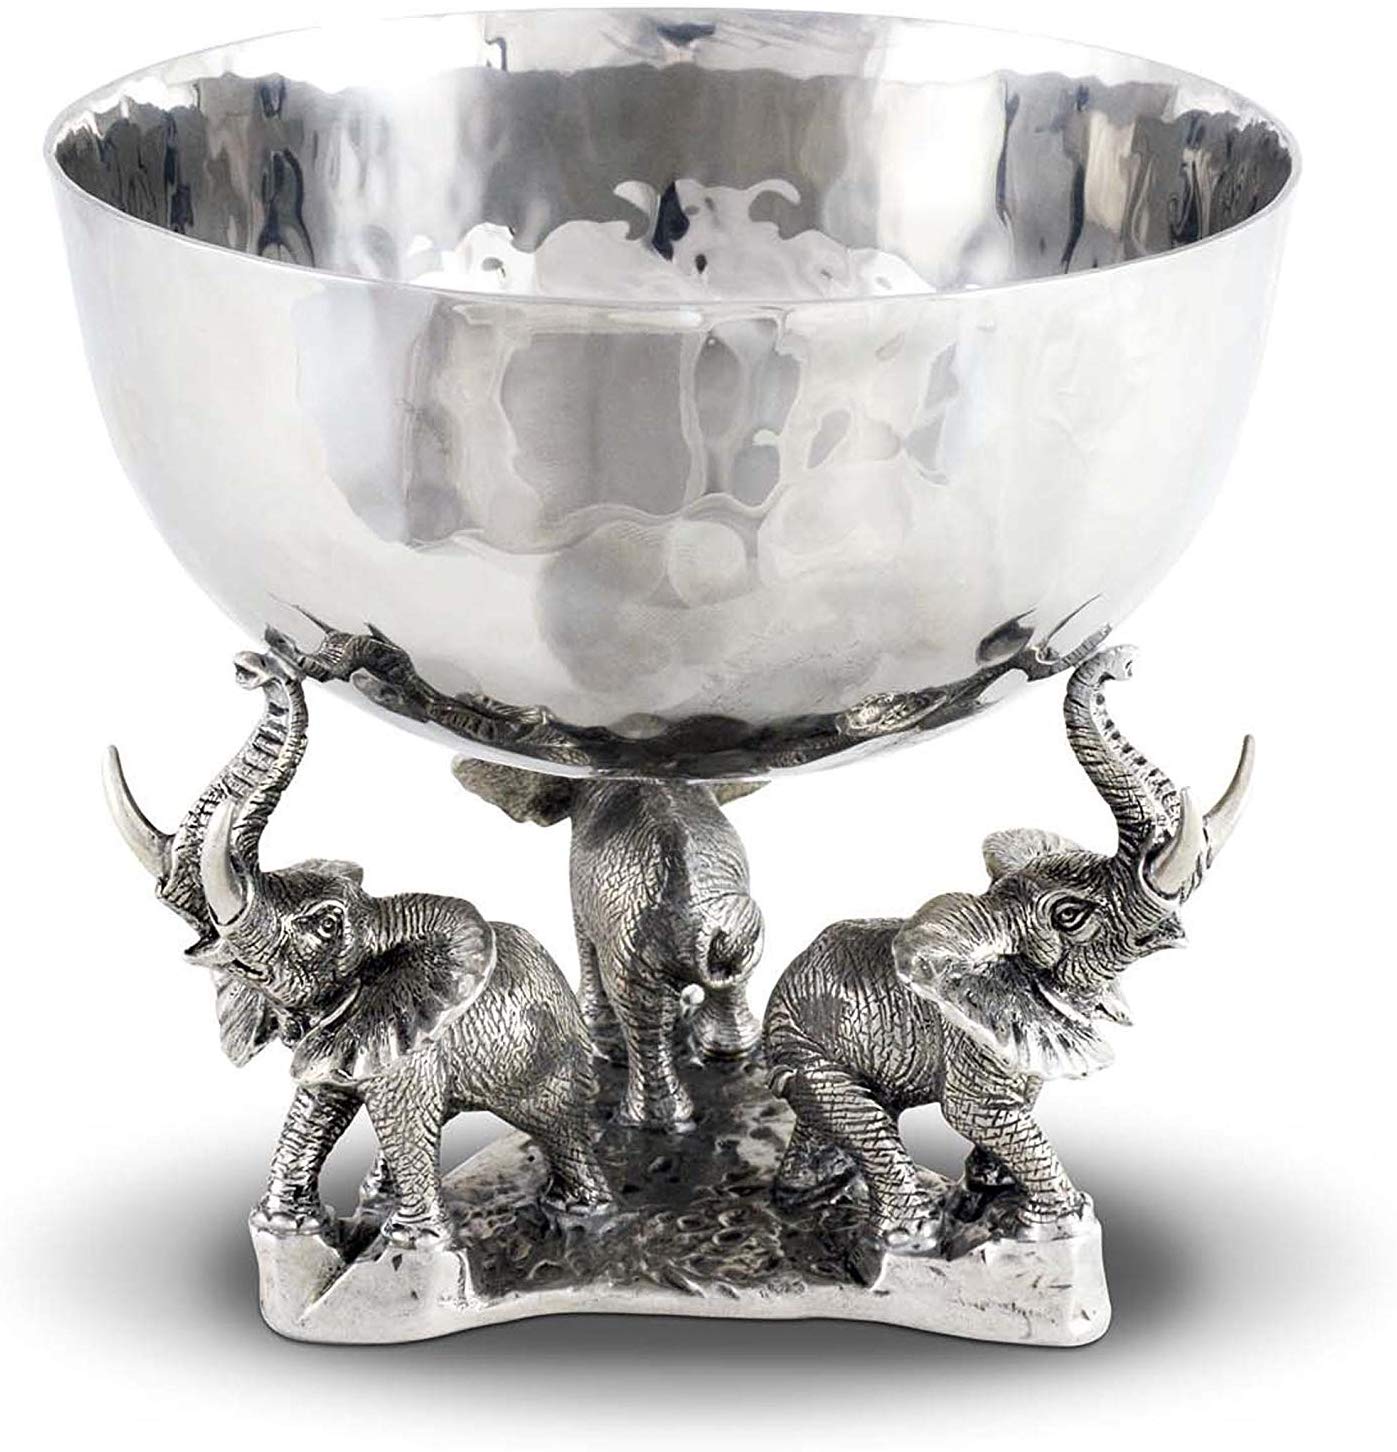 Luxury Bowl Ice Tub with 3 Elephants in Sterling Silver Pewter & Stainless Steel Hollywood